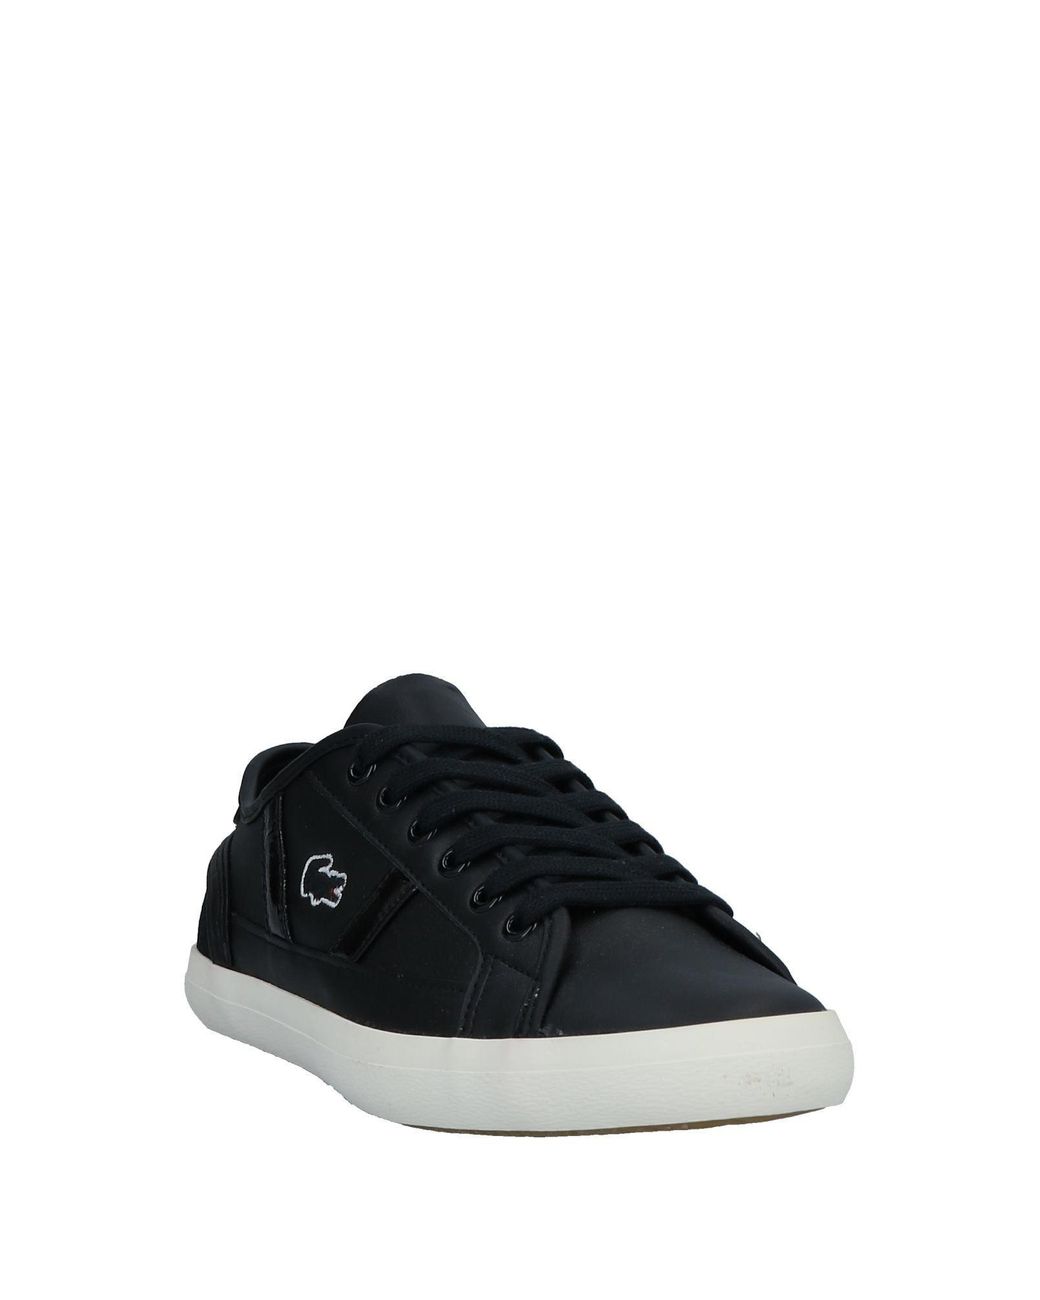 Lacoste Leather Trainers in Black - Lyst